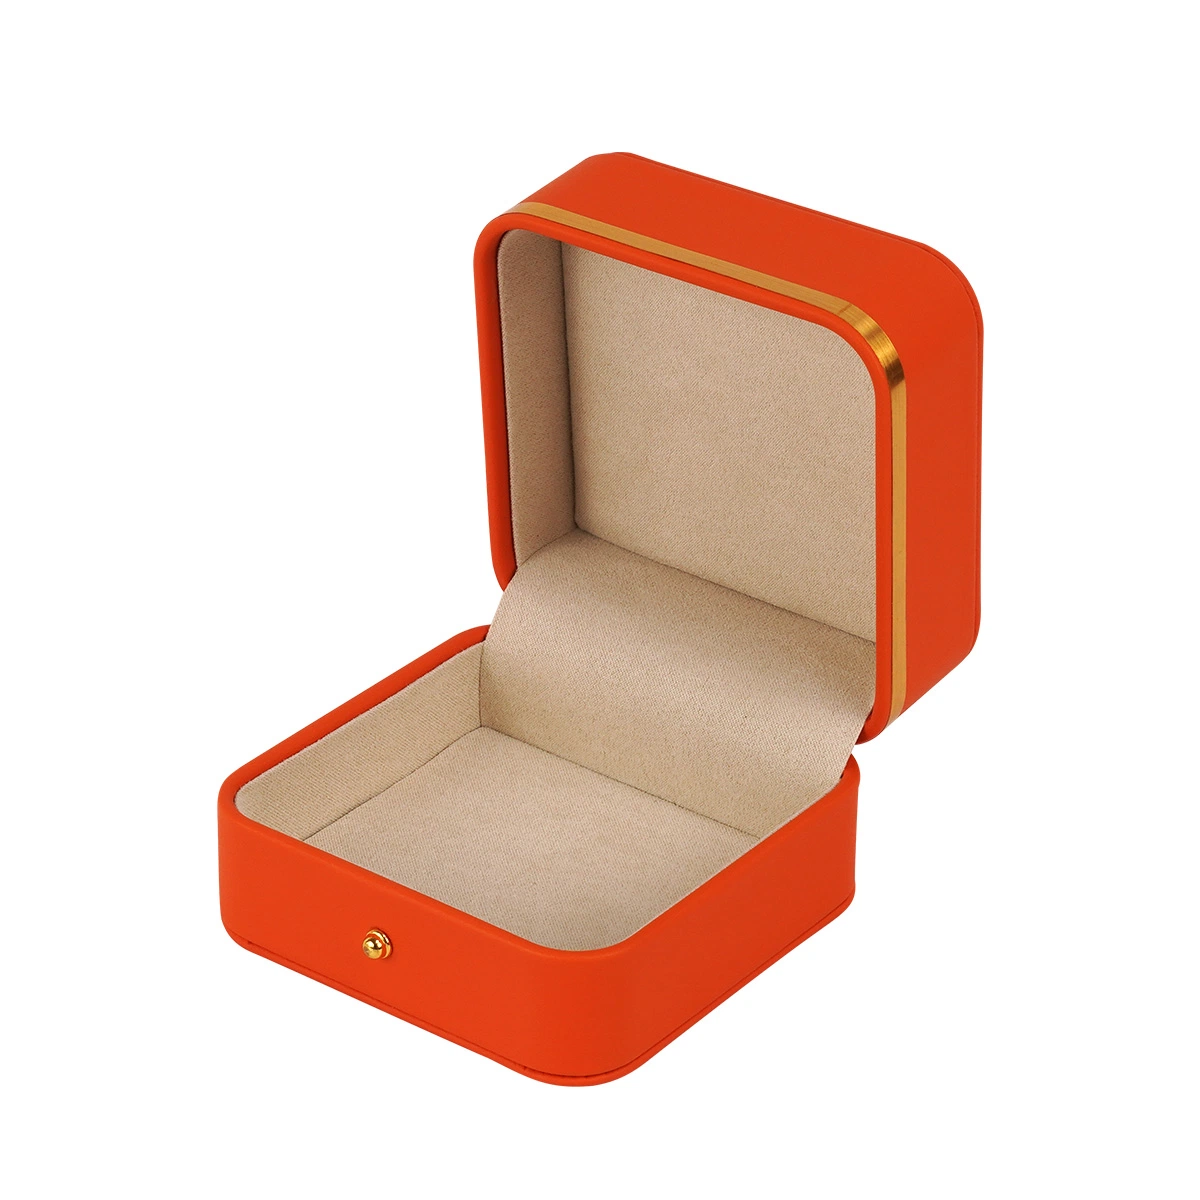 Orange Colorful Jewellery Box Gift Box Leather Jewelry Packing Container